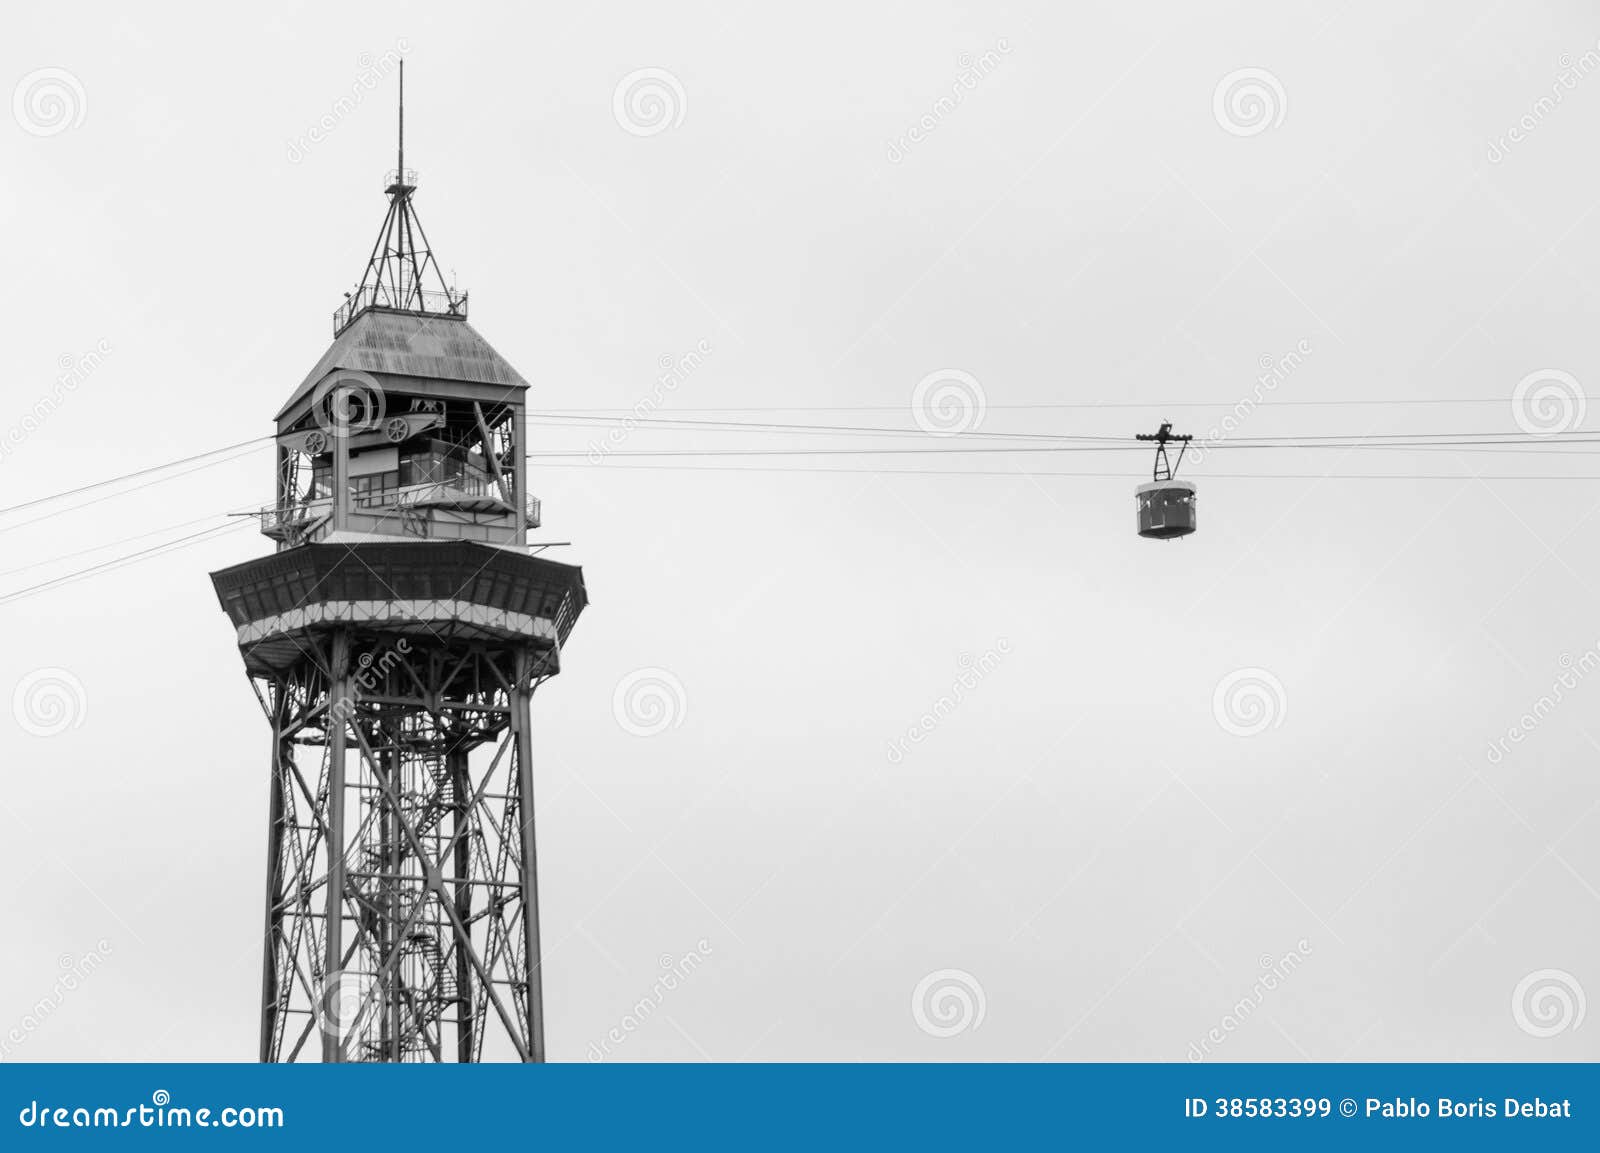 teleferico montjuic and cabin at barcelona